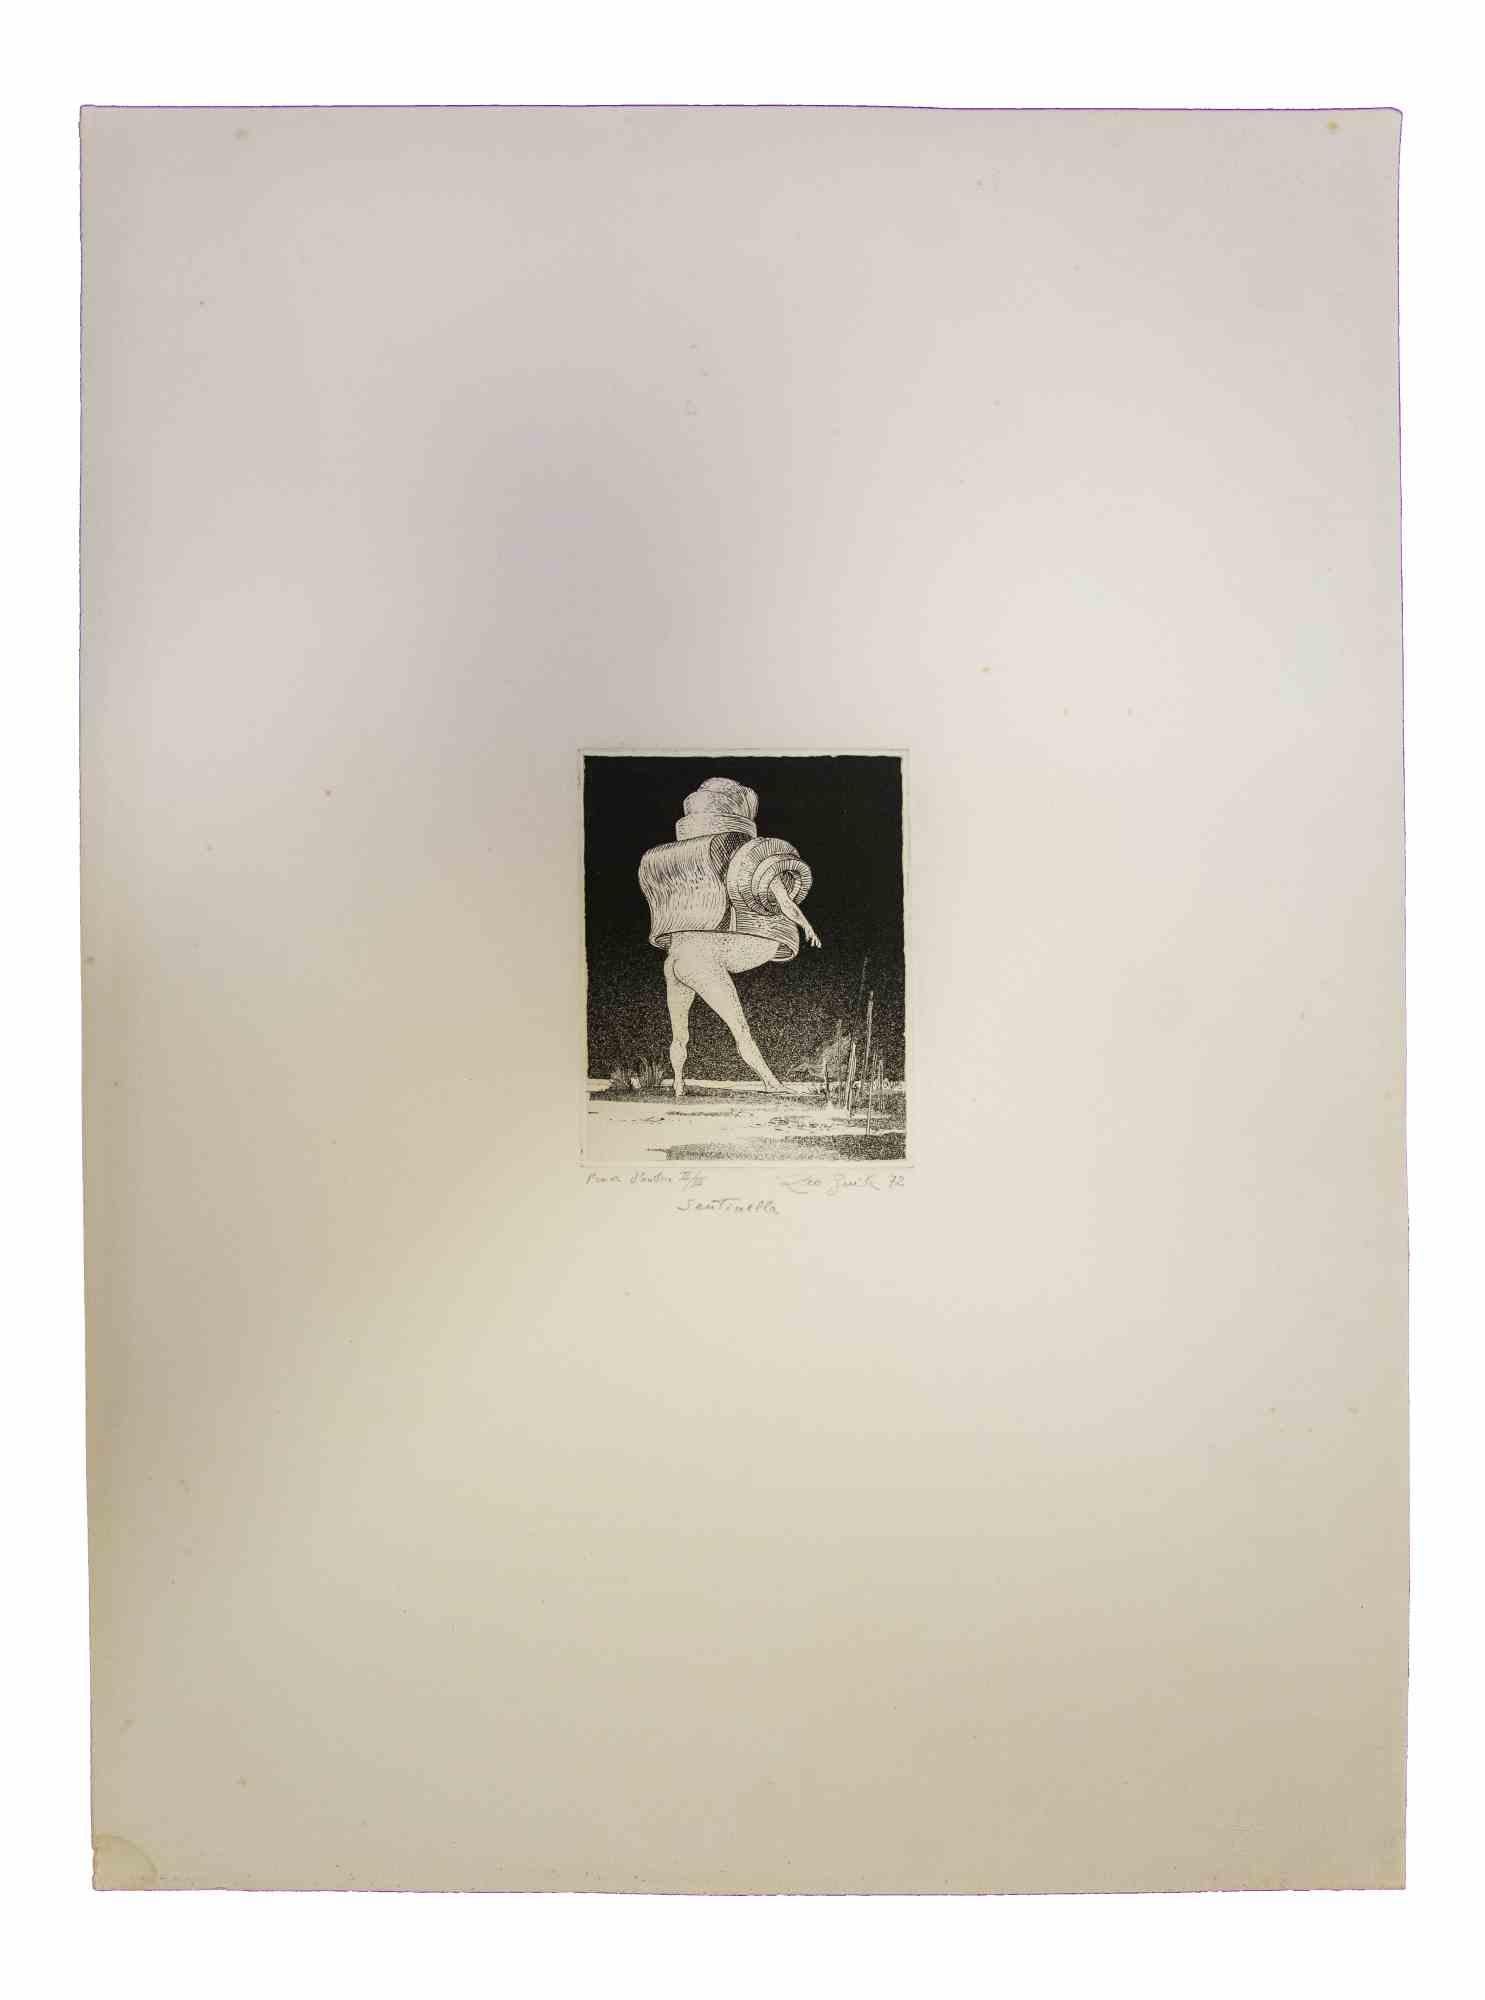 The Sentinel is an original etching realized by Leo Guida in 1970s.

Good condition.

Mounted on a white cardboard passpartout (50x35 cm).

Hand-signed.

Leo Guida  (1992 - 2017). Sensitive to current issues, artistic movements and historical